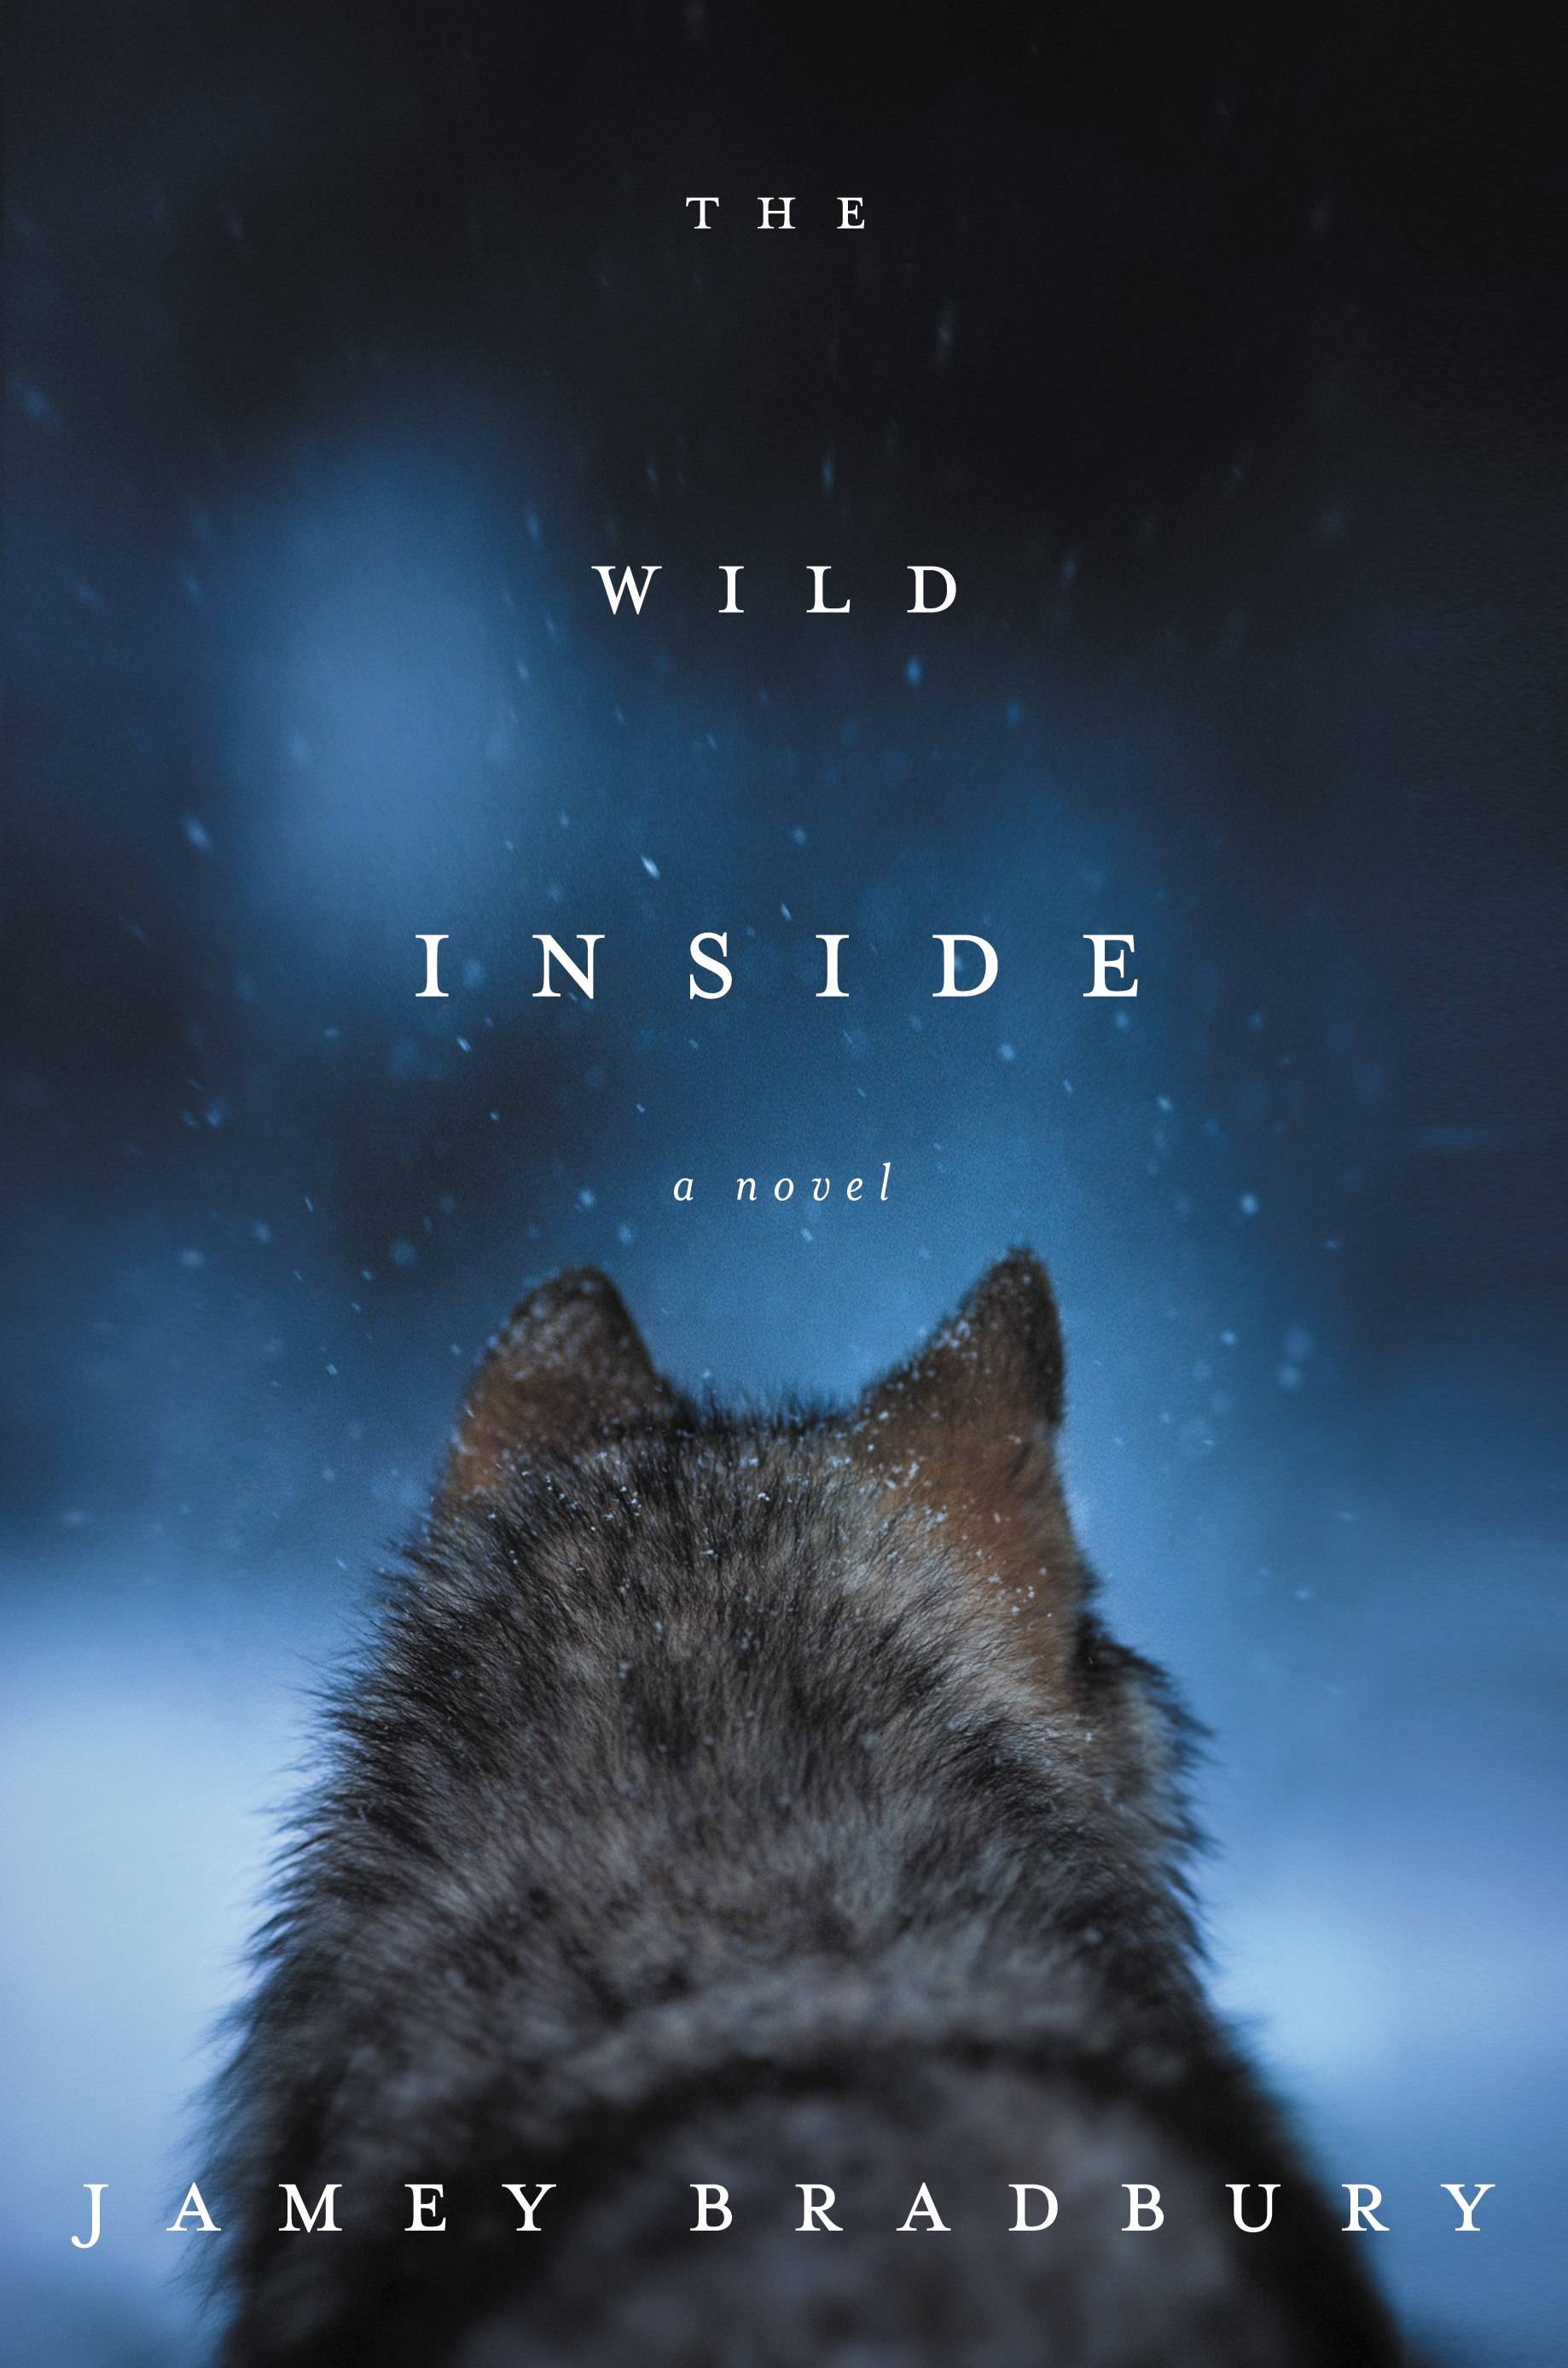 The Bookworm Sez: ‘The Wild Inside’ will make you howl